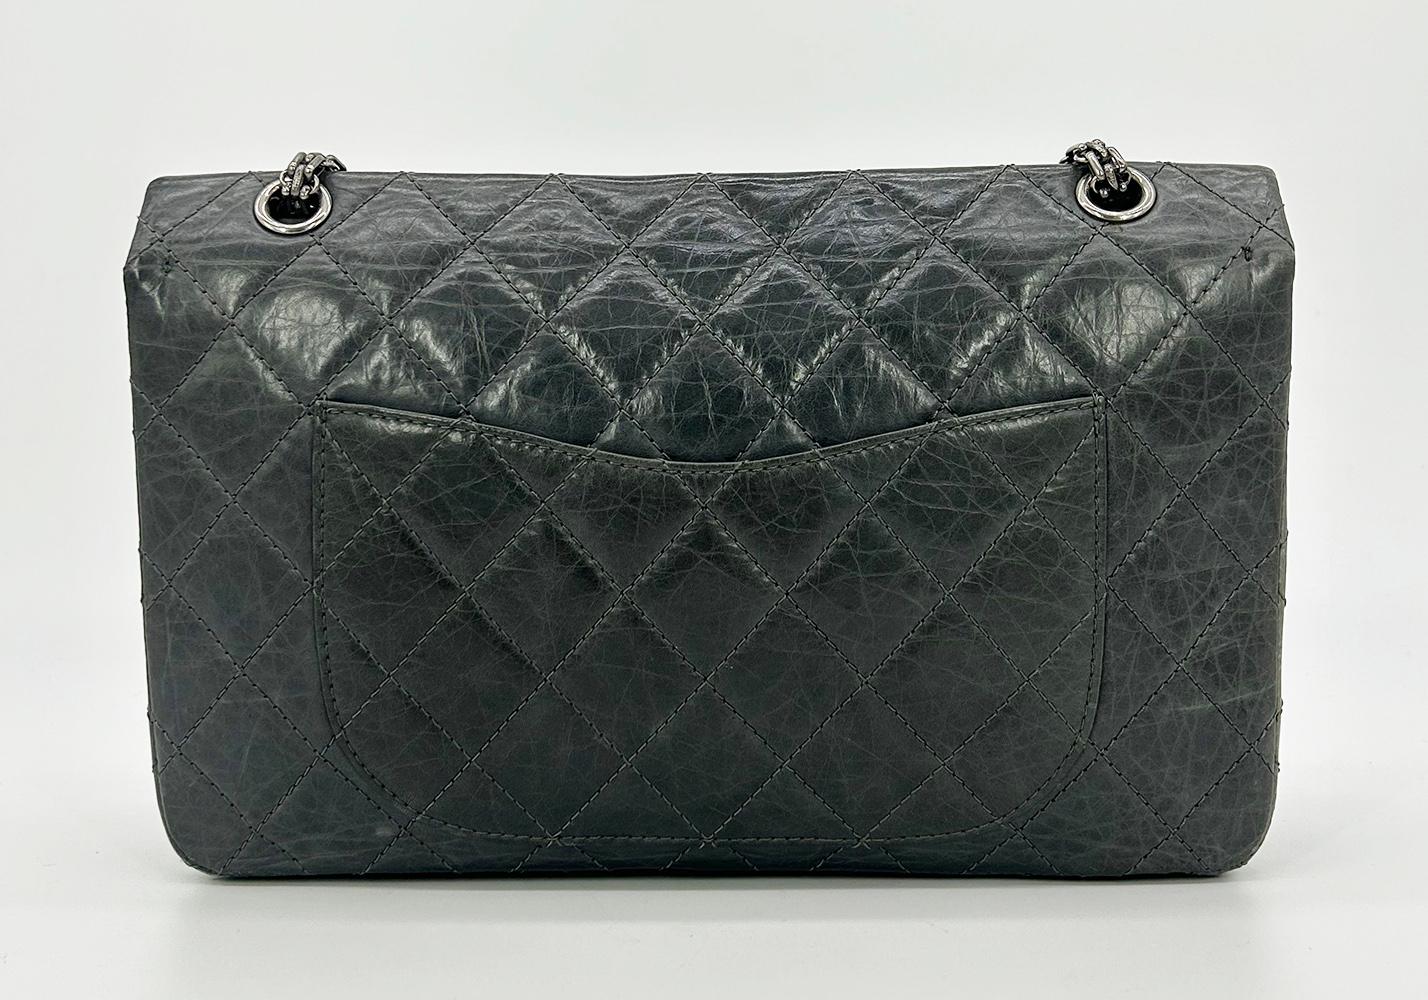 Chanel Grey Aged Calfskin Anniversary 2.55 Reissue 227 Double Flap Bag in good condition. Quilted grey aged calfskin exterior trimmed with ruthenium hardware and silver chain shoulder strap. Front mademoiselle twist lock closure opens via double